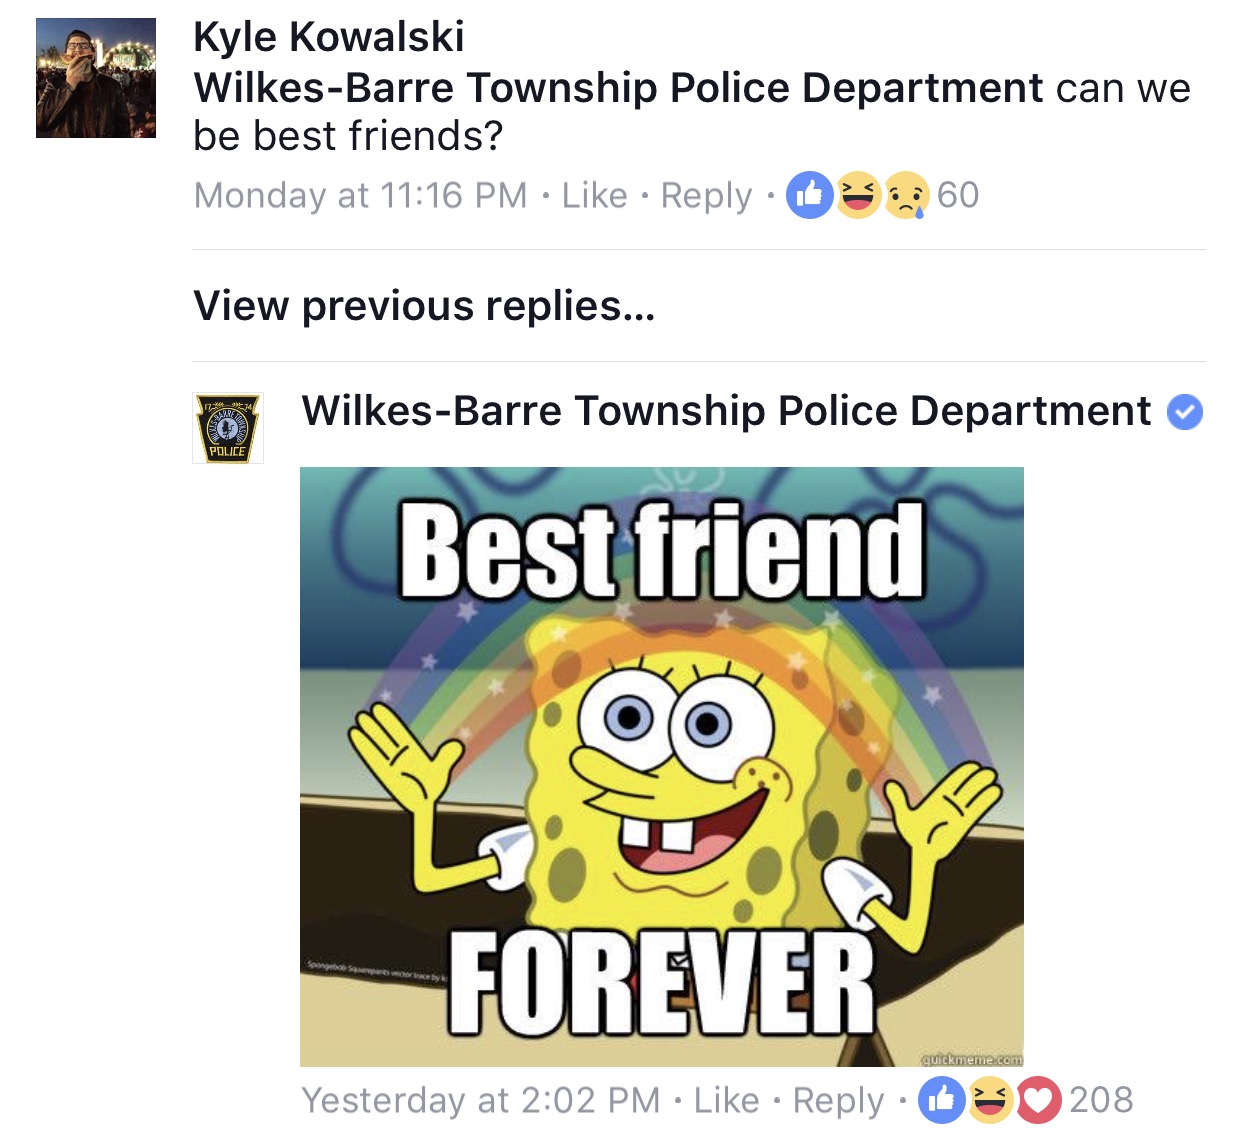 make your own meme - Kyle Kowalski WilkesBarre Township Police Department can we be best friends? Monday at . 60 View previous replies... WilkesBarre Township Police Department Best friend Forever quickmeme.com Yesterday at 6 2 08